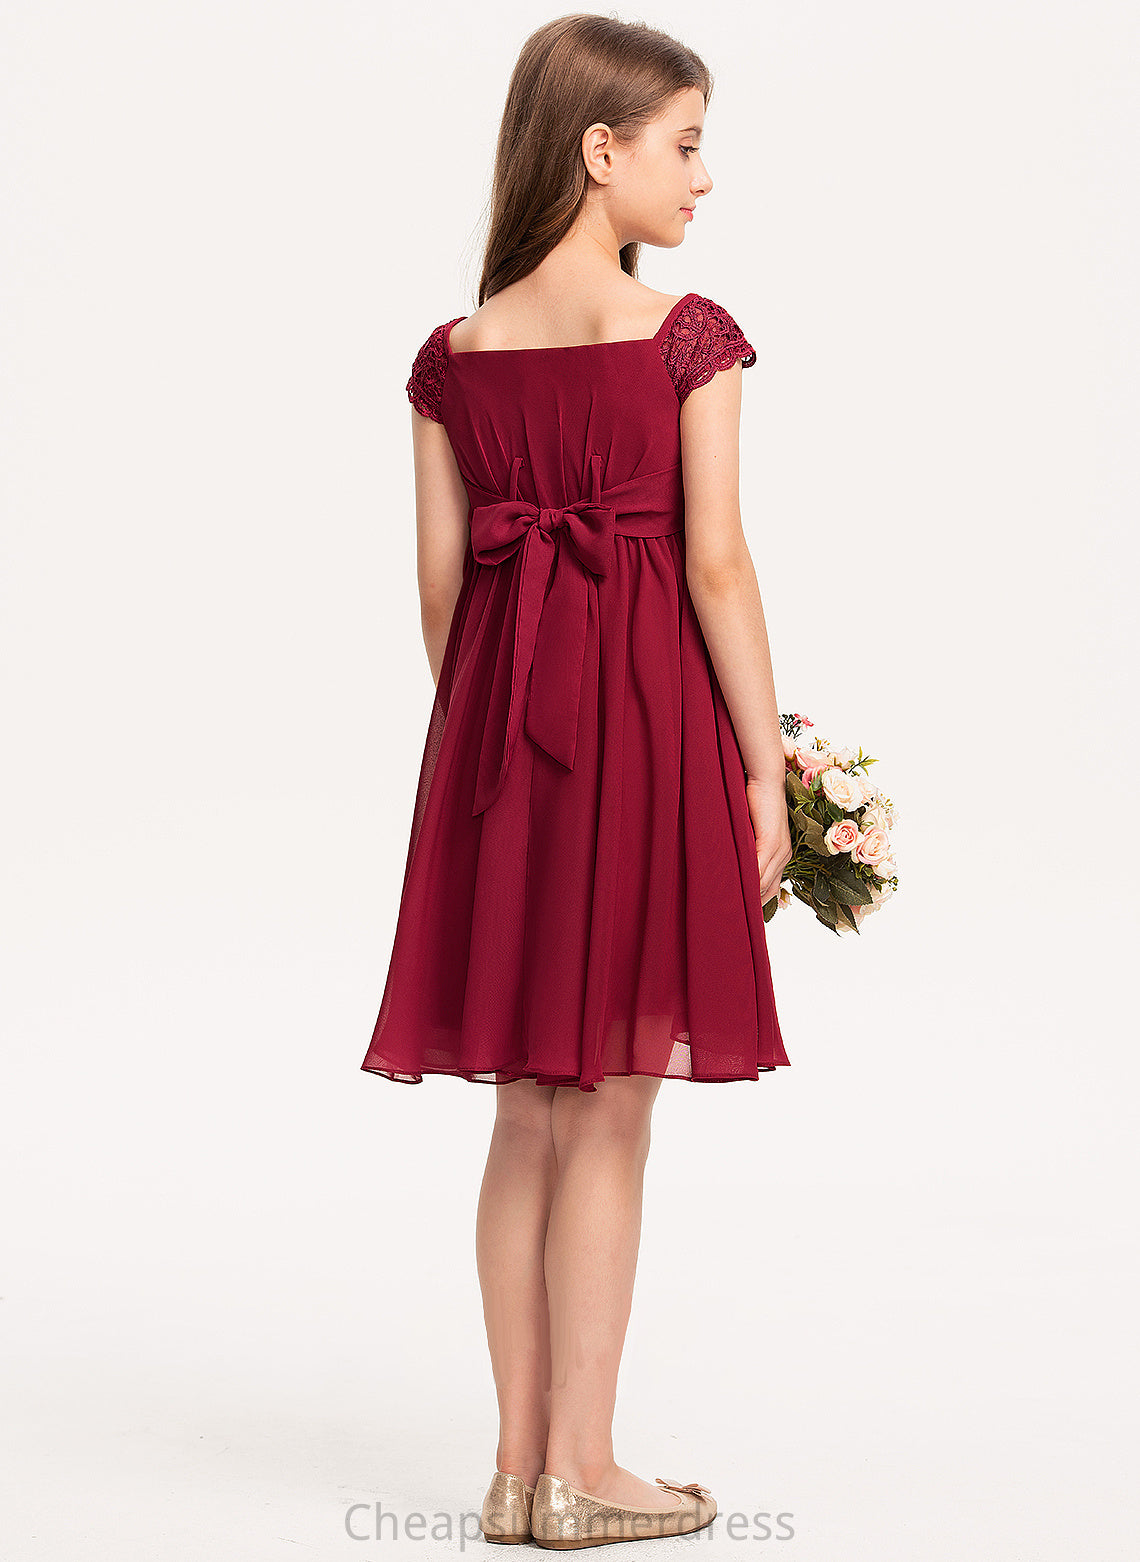 Bow(s) Courtney Knee-Length Chiffon Junior Bridesmaid Dresses Lace Off-the-Shoulder A-Line With